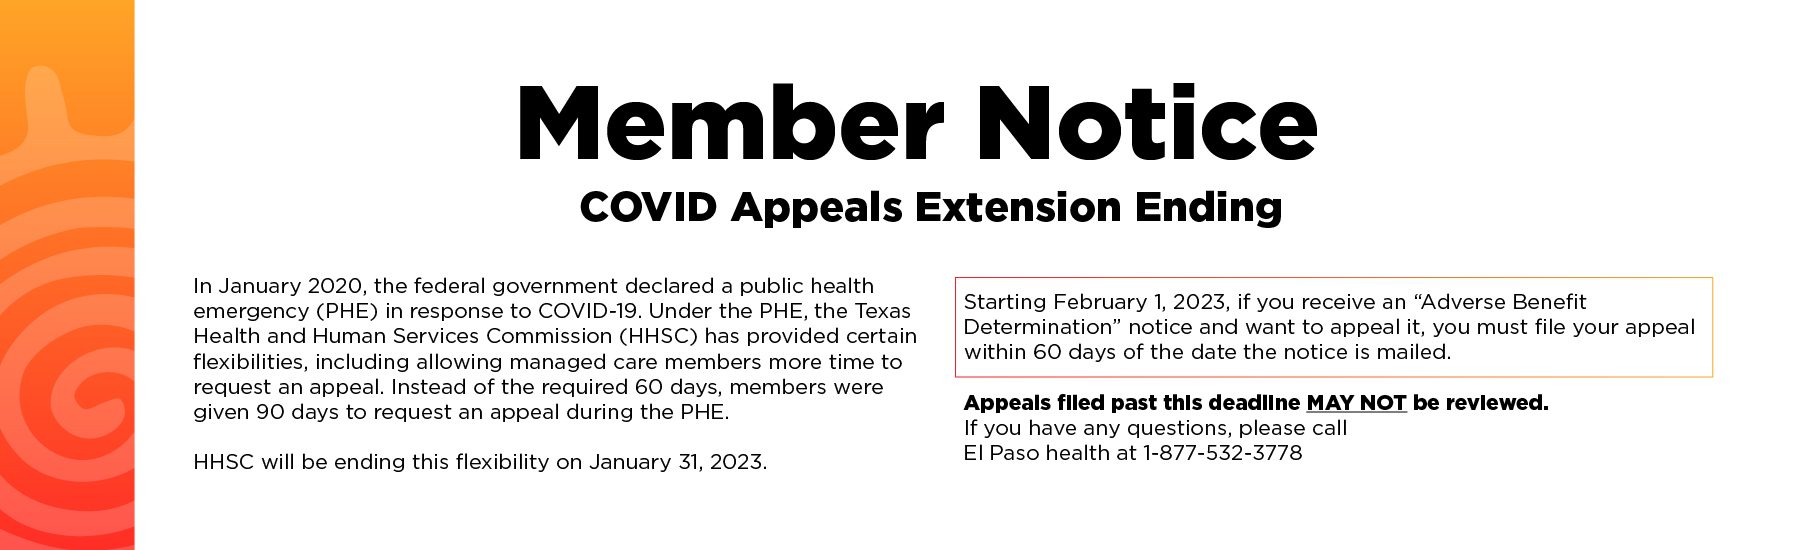 Member Notice-COVID appeals extension ending In January 2020, the federal government declared a public health emergency (PHE) in response to COVID-19. Under the PHE, the Texas Health and Human Services Commission (HHSC) has provided certain flexibilities, including allowing managed care members more time to request an appeal. Instead of the required 60 days, members were given 90 days to request an appeal during the PHE. HHSC will be ending this flexibility on January 31, 2023. Starting February 1, 2023, if you receive an “Adverse Benefit Determination” notice and want to appeal it, you must file your appeal within 60 days of the date the notice is mailed. Appeals filed past this deadline may not be reviewed. If you have any questions, please reach out to your health plan representative.